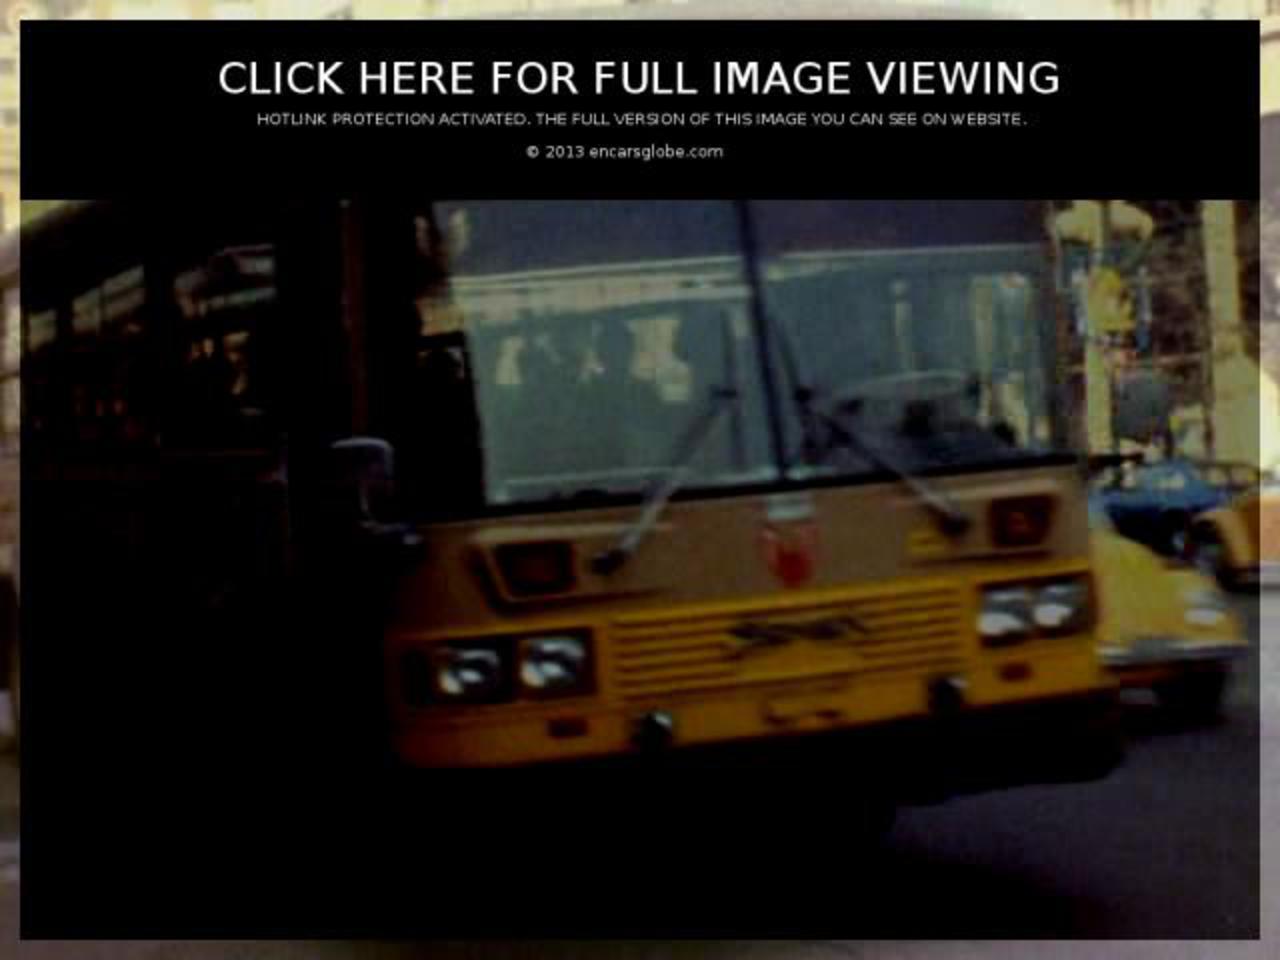 MASA Trolley-bus Photo Gallery: Photo #09 out of 12, Image Size ...